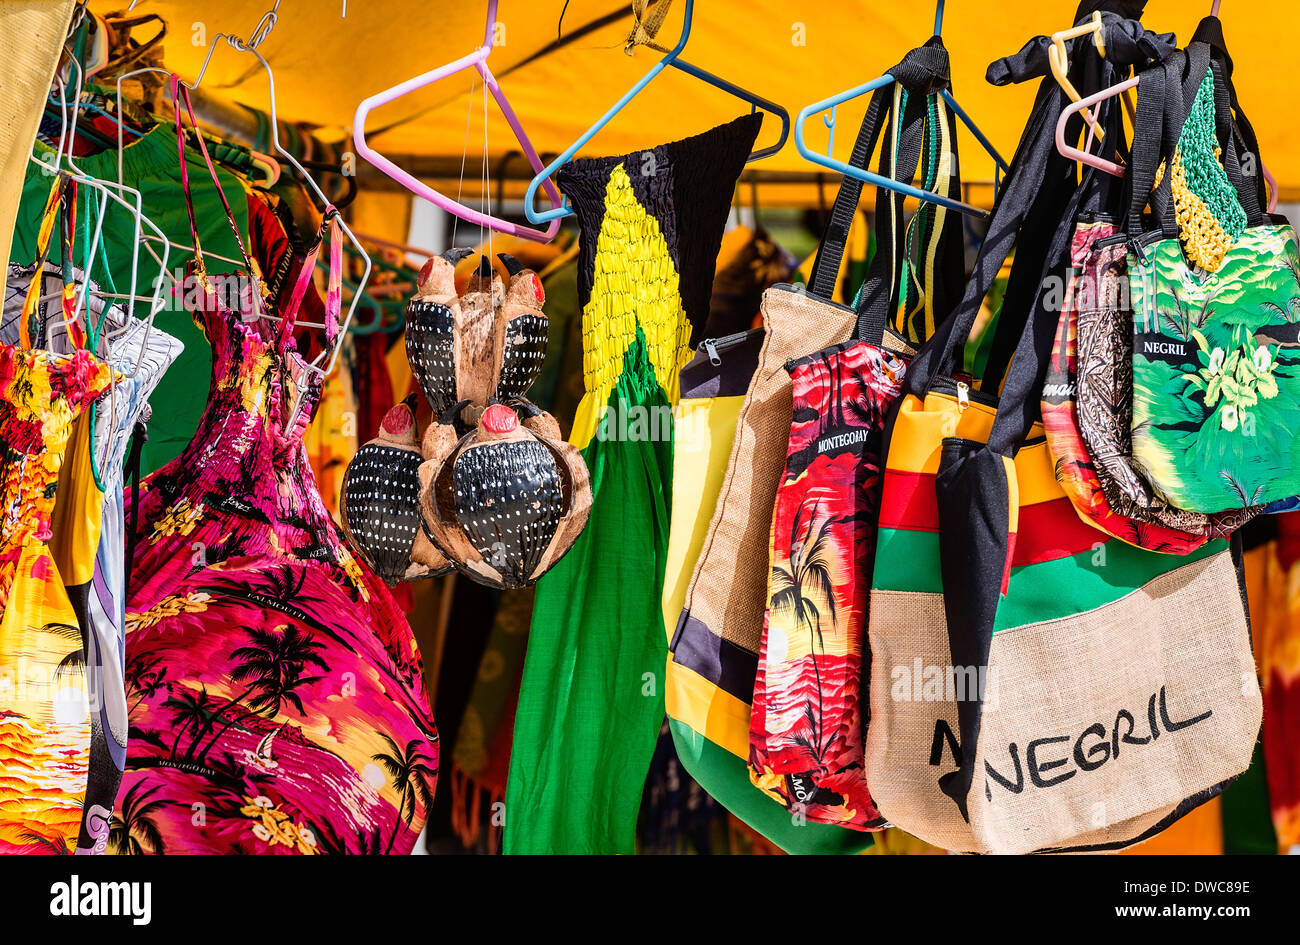 Jamaican bags and souvenir for sale in beach tent shop, Negril, Jamaica Stock Photo